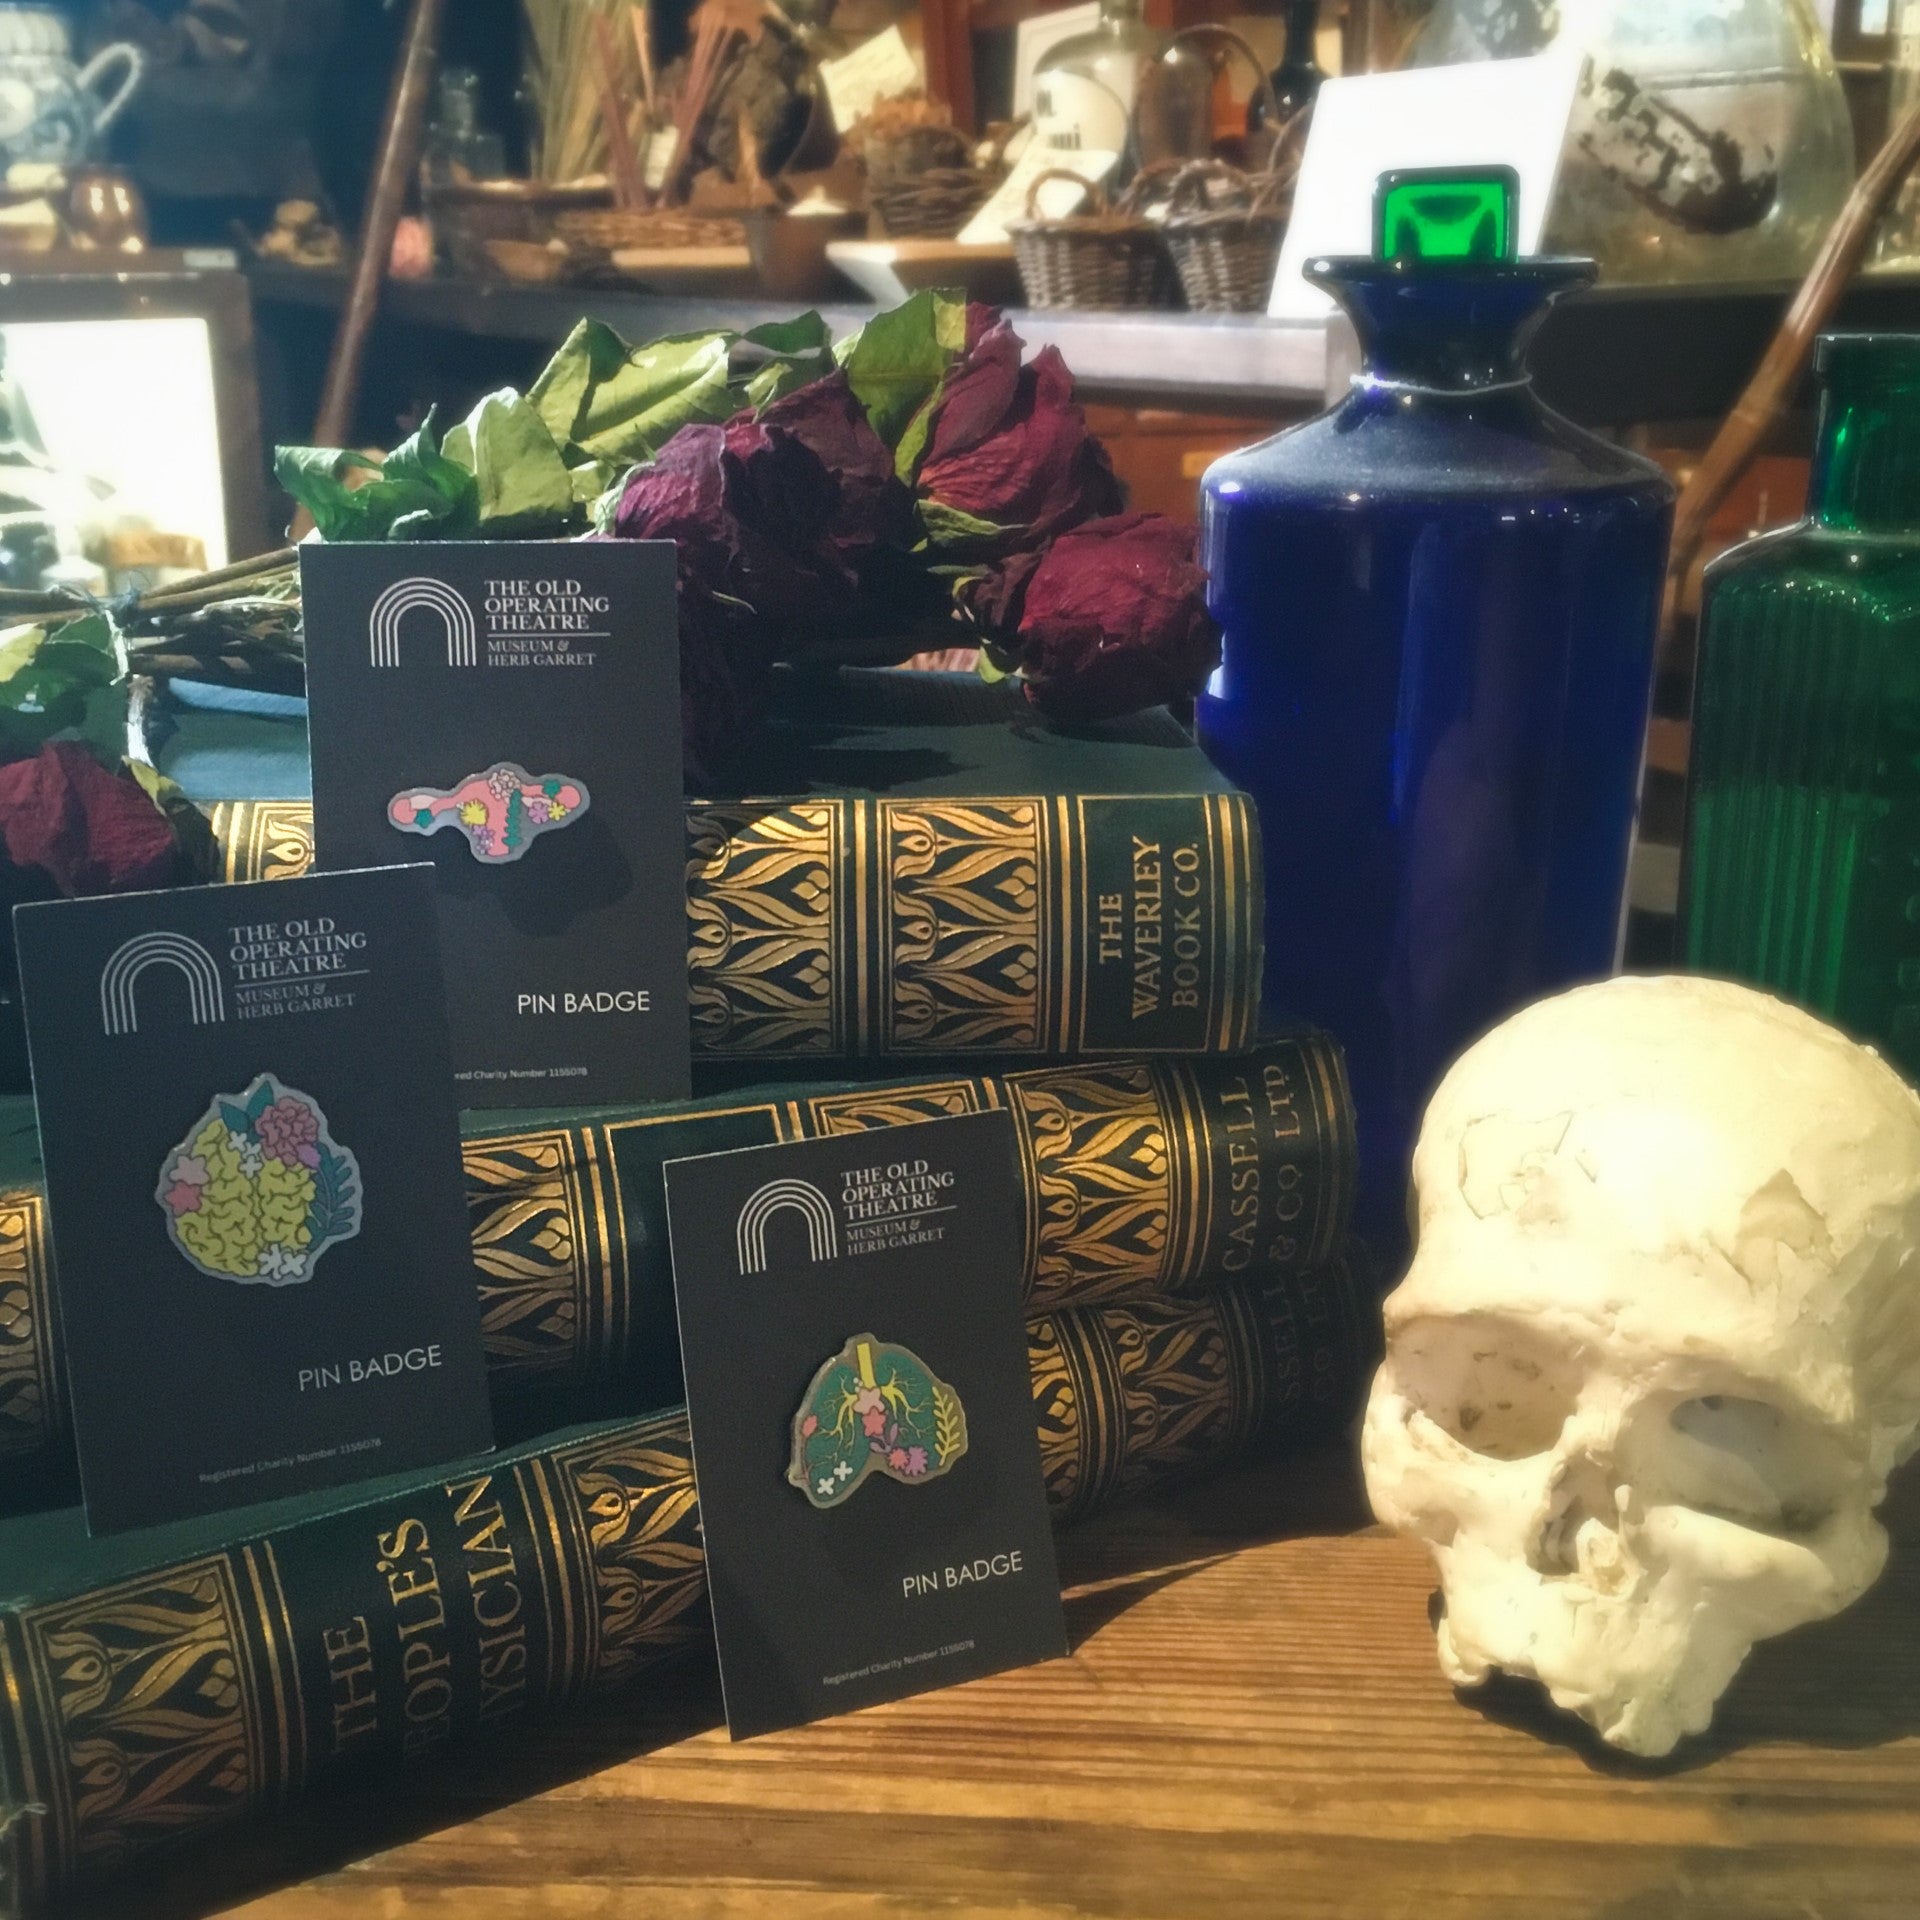 Uterus, lung and brain pin badges displayed on a set of hardback books on top of which are dried roses, next to a small skull and blue and green glass bottles